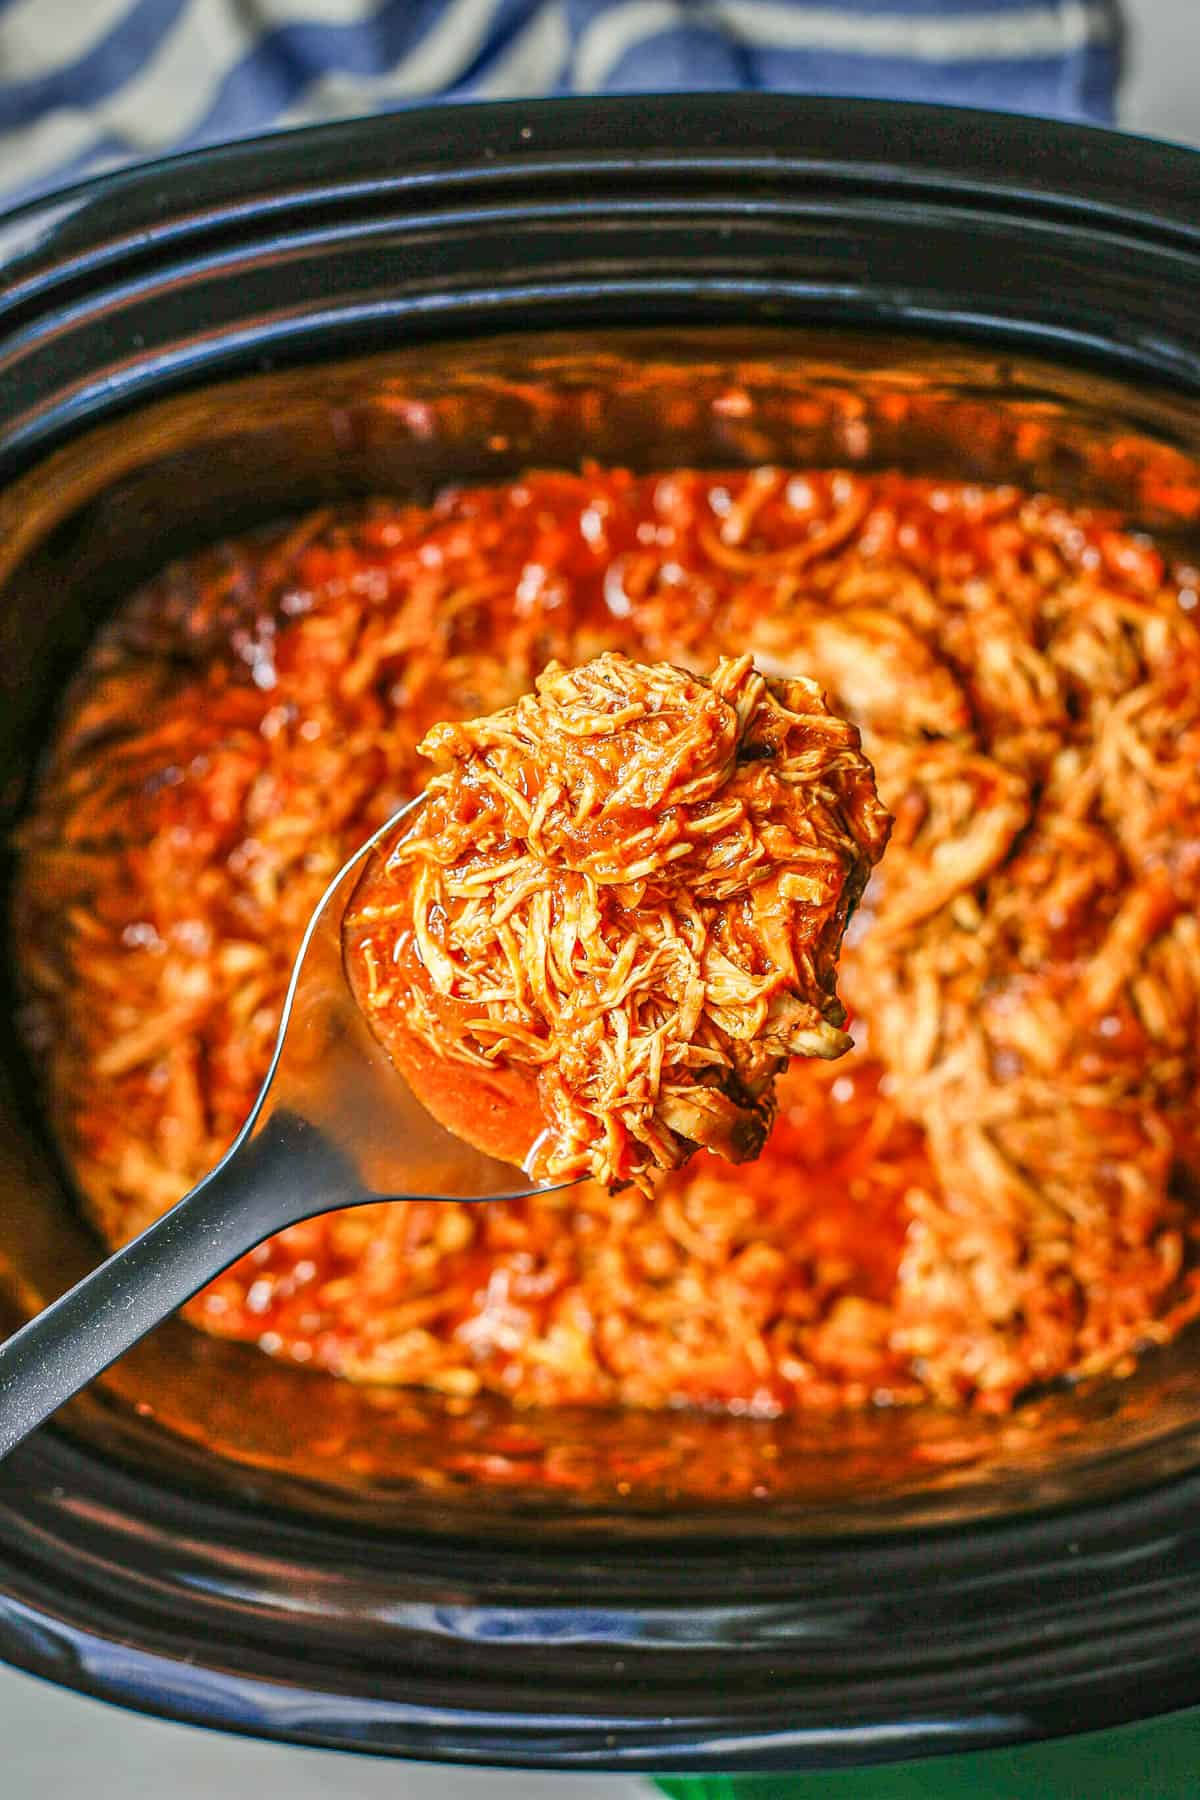 A scoop of slow cooker BBQ chicken being lifted out of the crock pot insert.